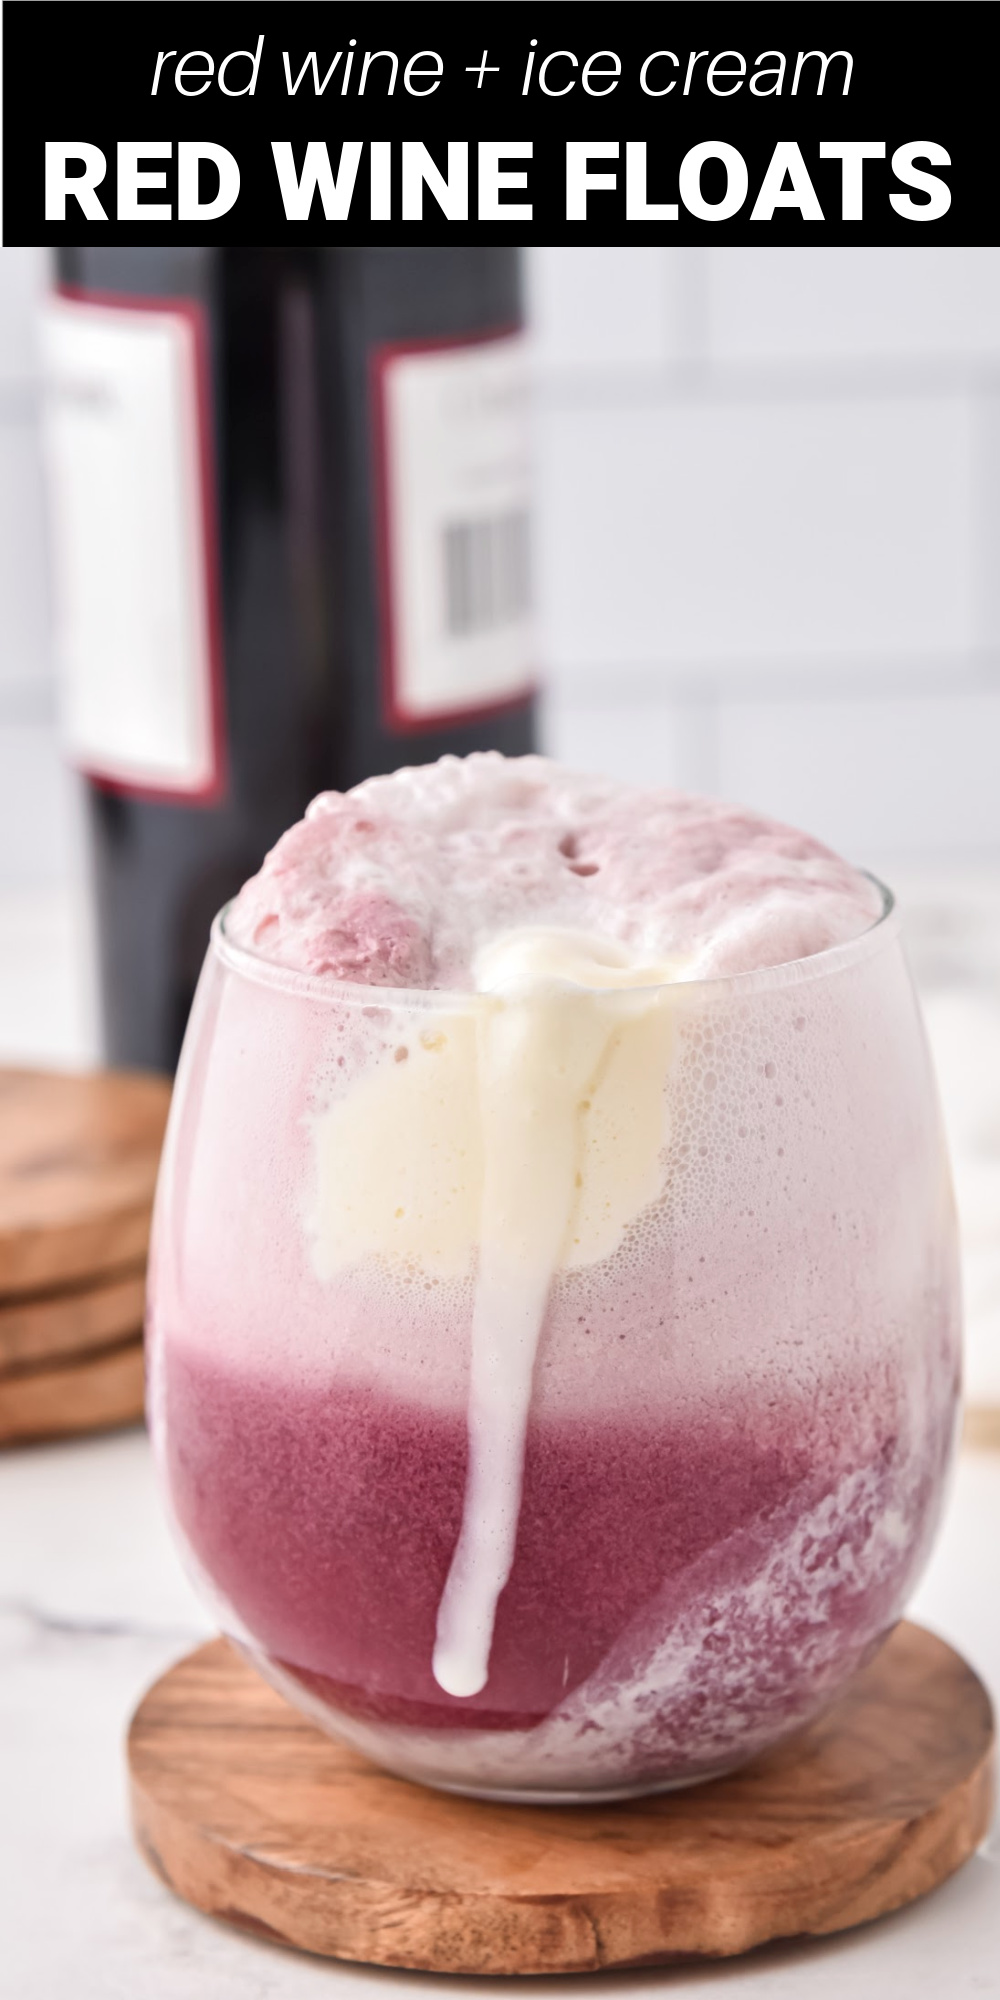 These delicious Red Wine Ice Cream Floats take two of your favorites, wine and ice cream, and combines them into the ultimate fruity dessert cocktail. They are a perfectly refreshing adult beverage and a great way to cool off on a hot summer day! 